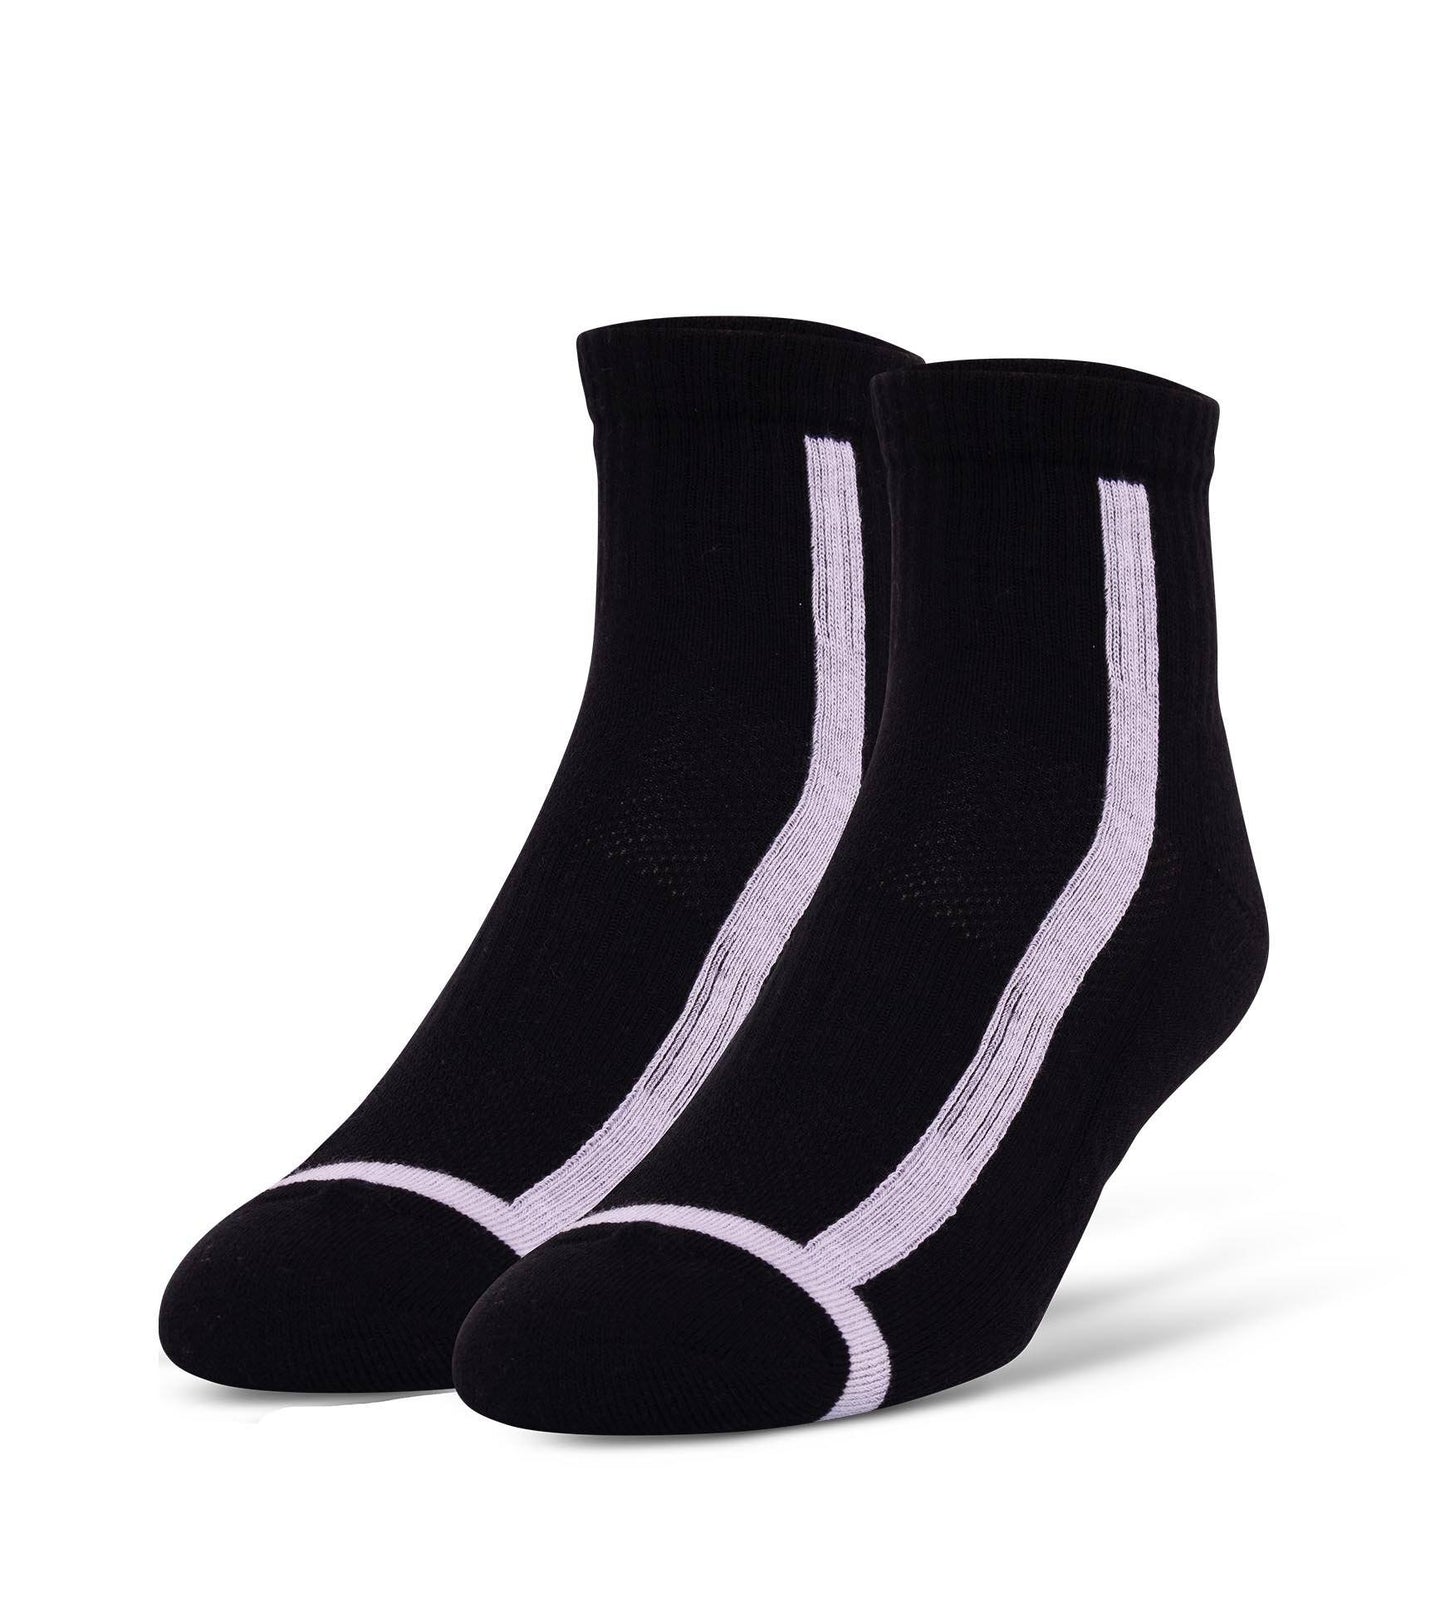 Special Edition Blackout Whiteout Cushion Ankle Sock 3 Pack contains colors Lavender, Black, Dark Gray, Silver, Dark slate gray, Thistle, Black, Black, Dim gray